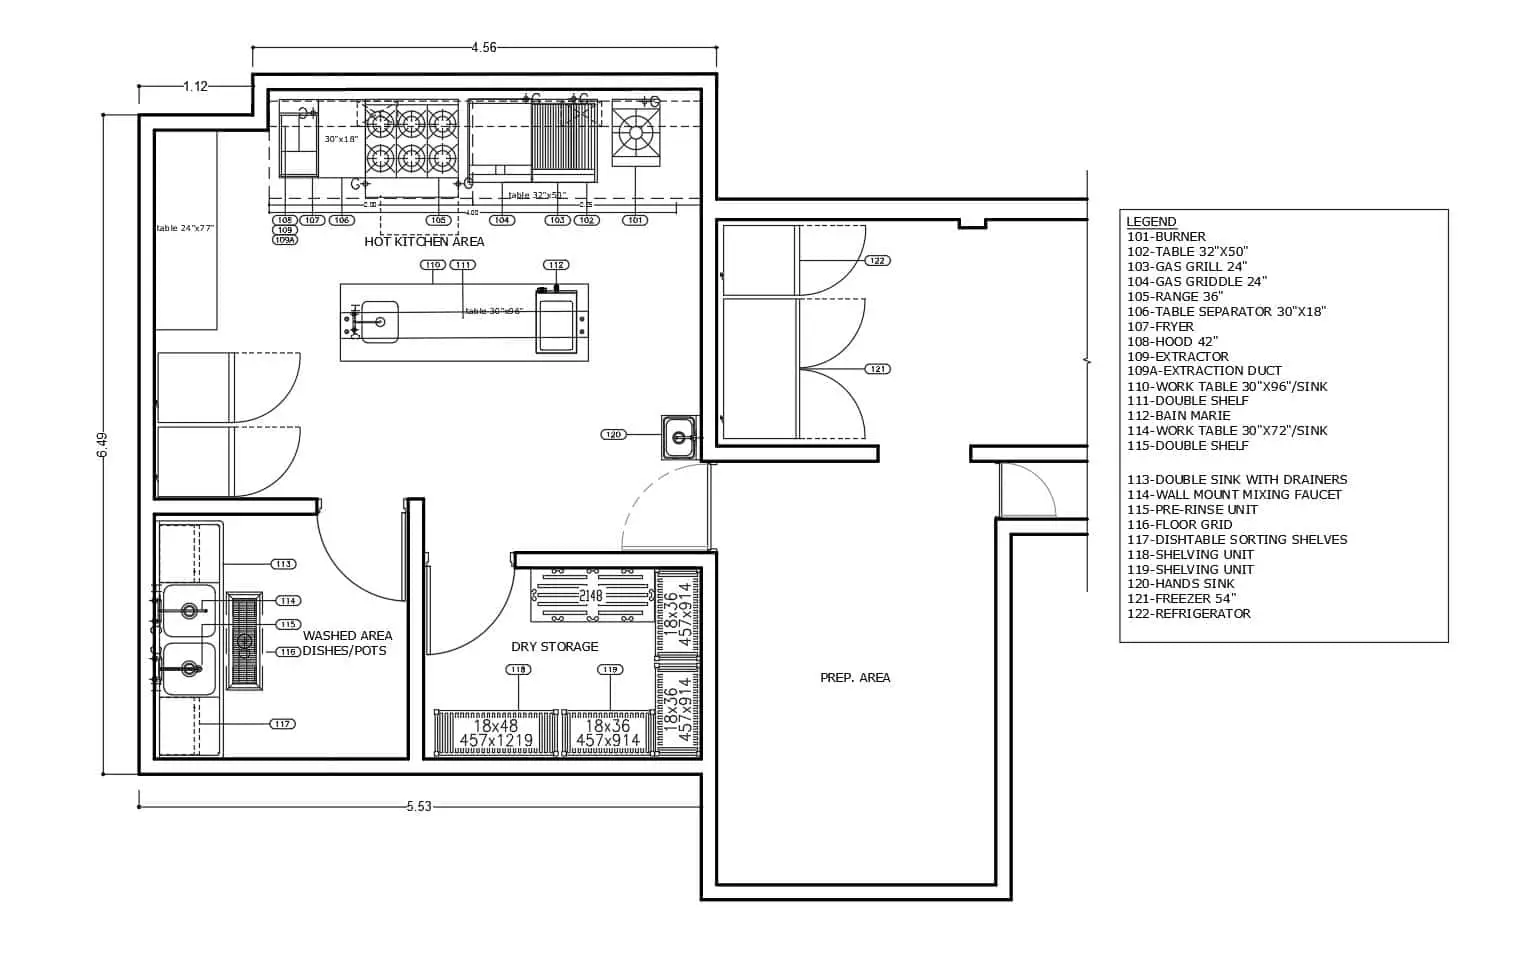 Small Commercial Kitchen Layout Floor Plan 0508202 INOX